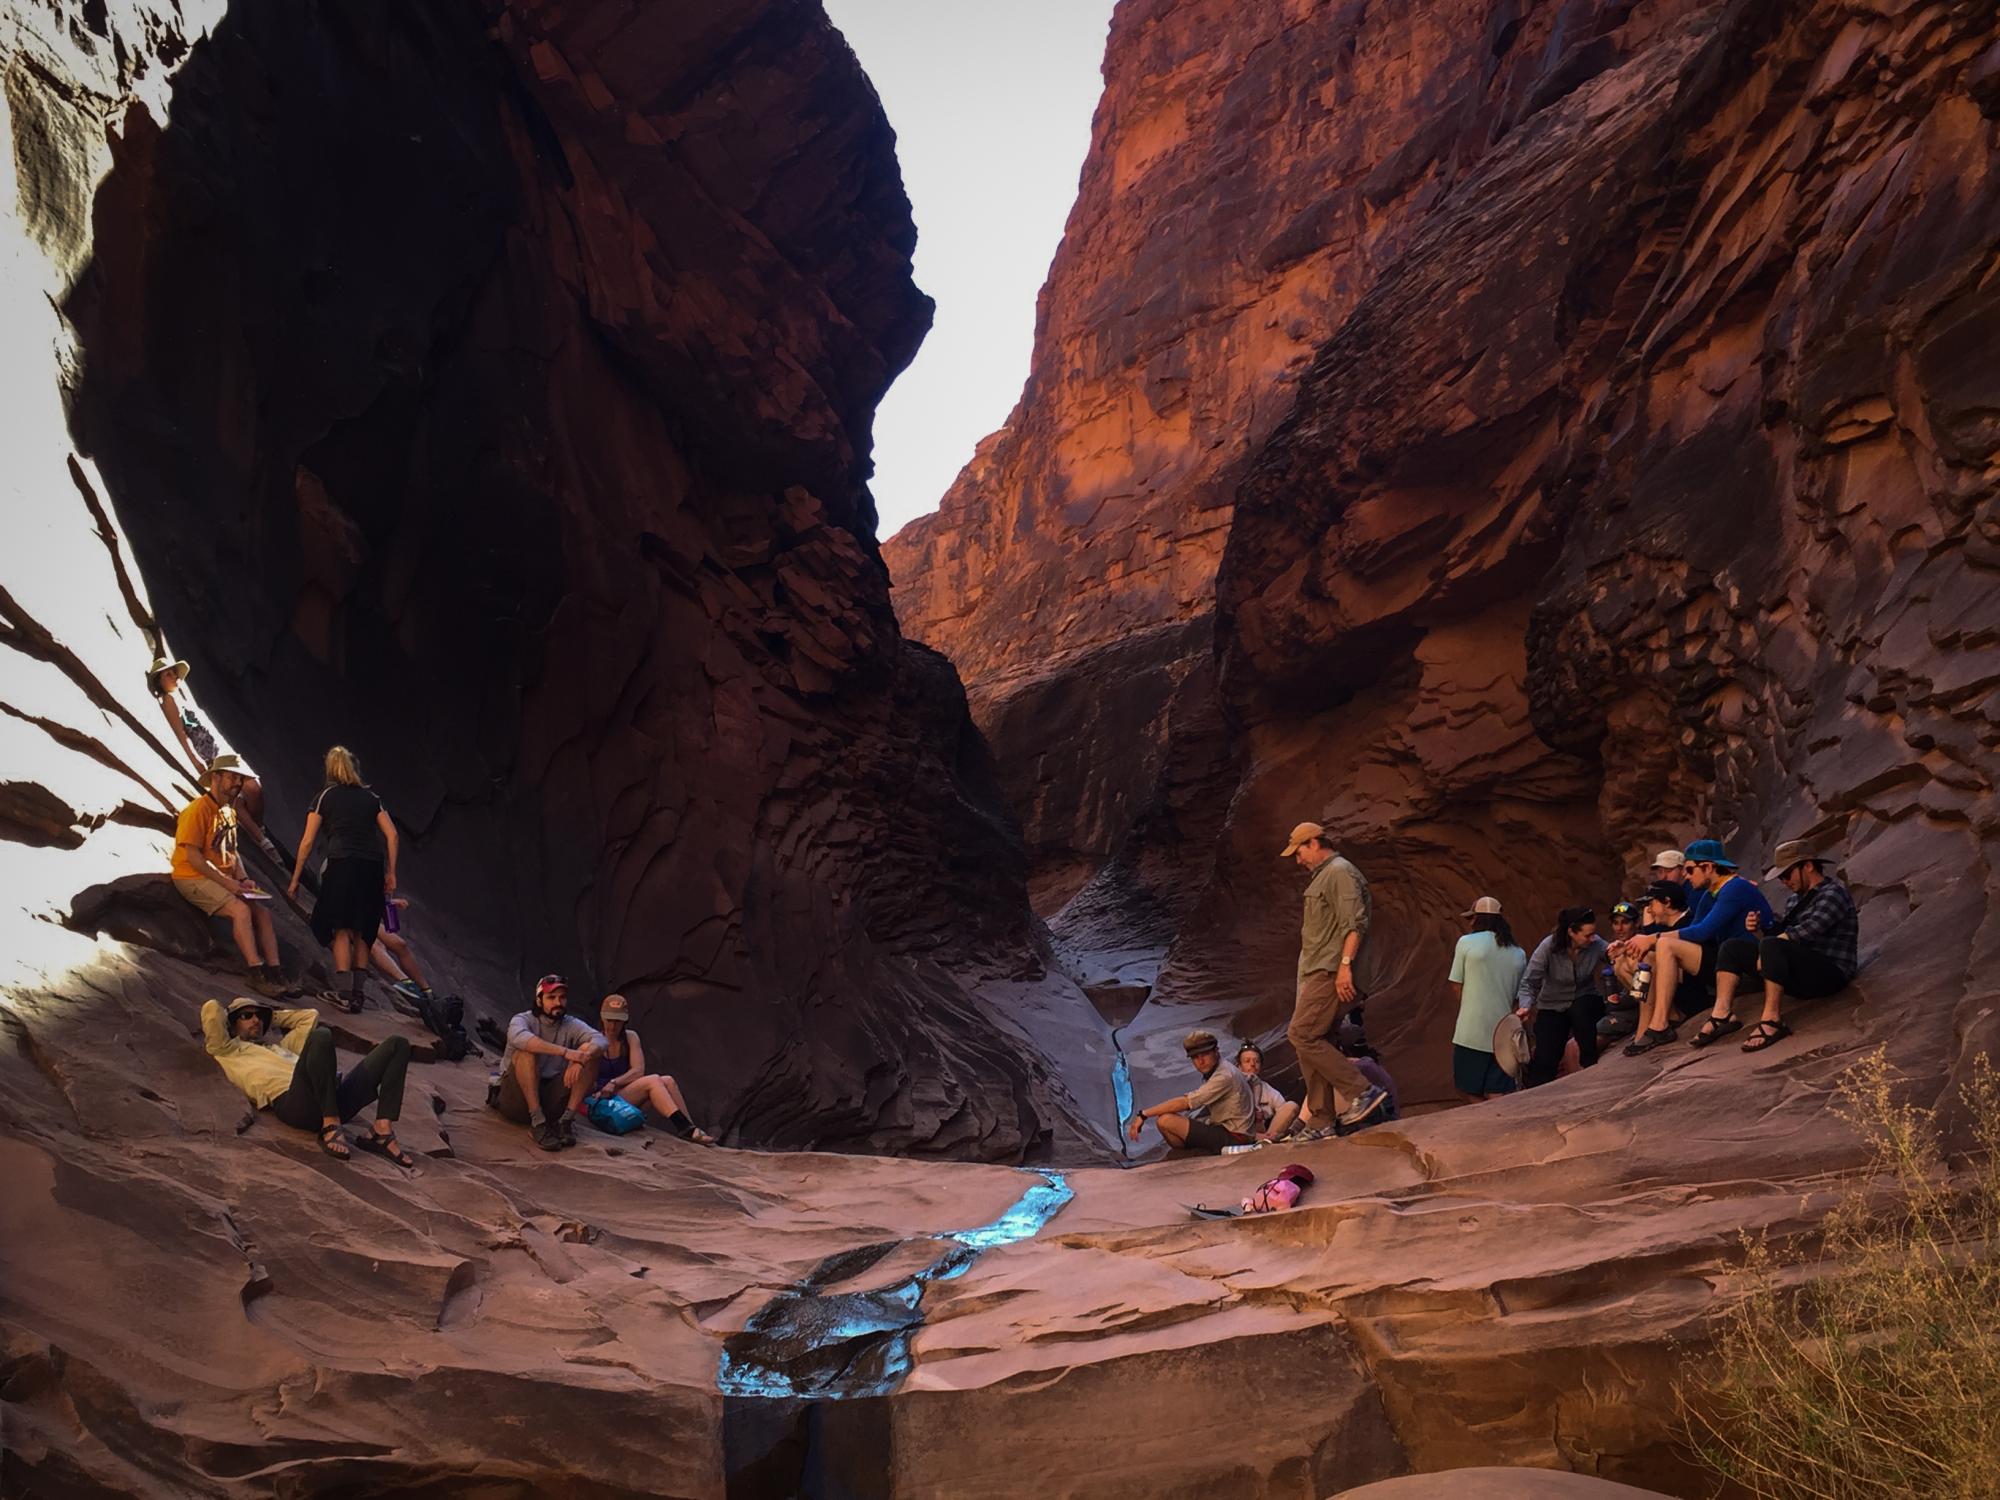 Students in North Canyon of Grand Canyon